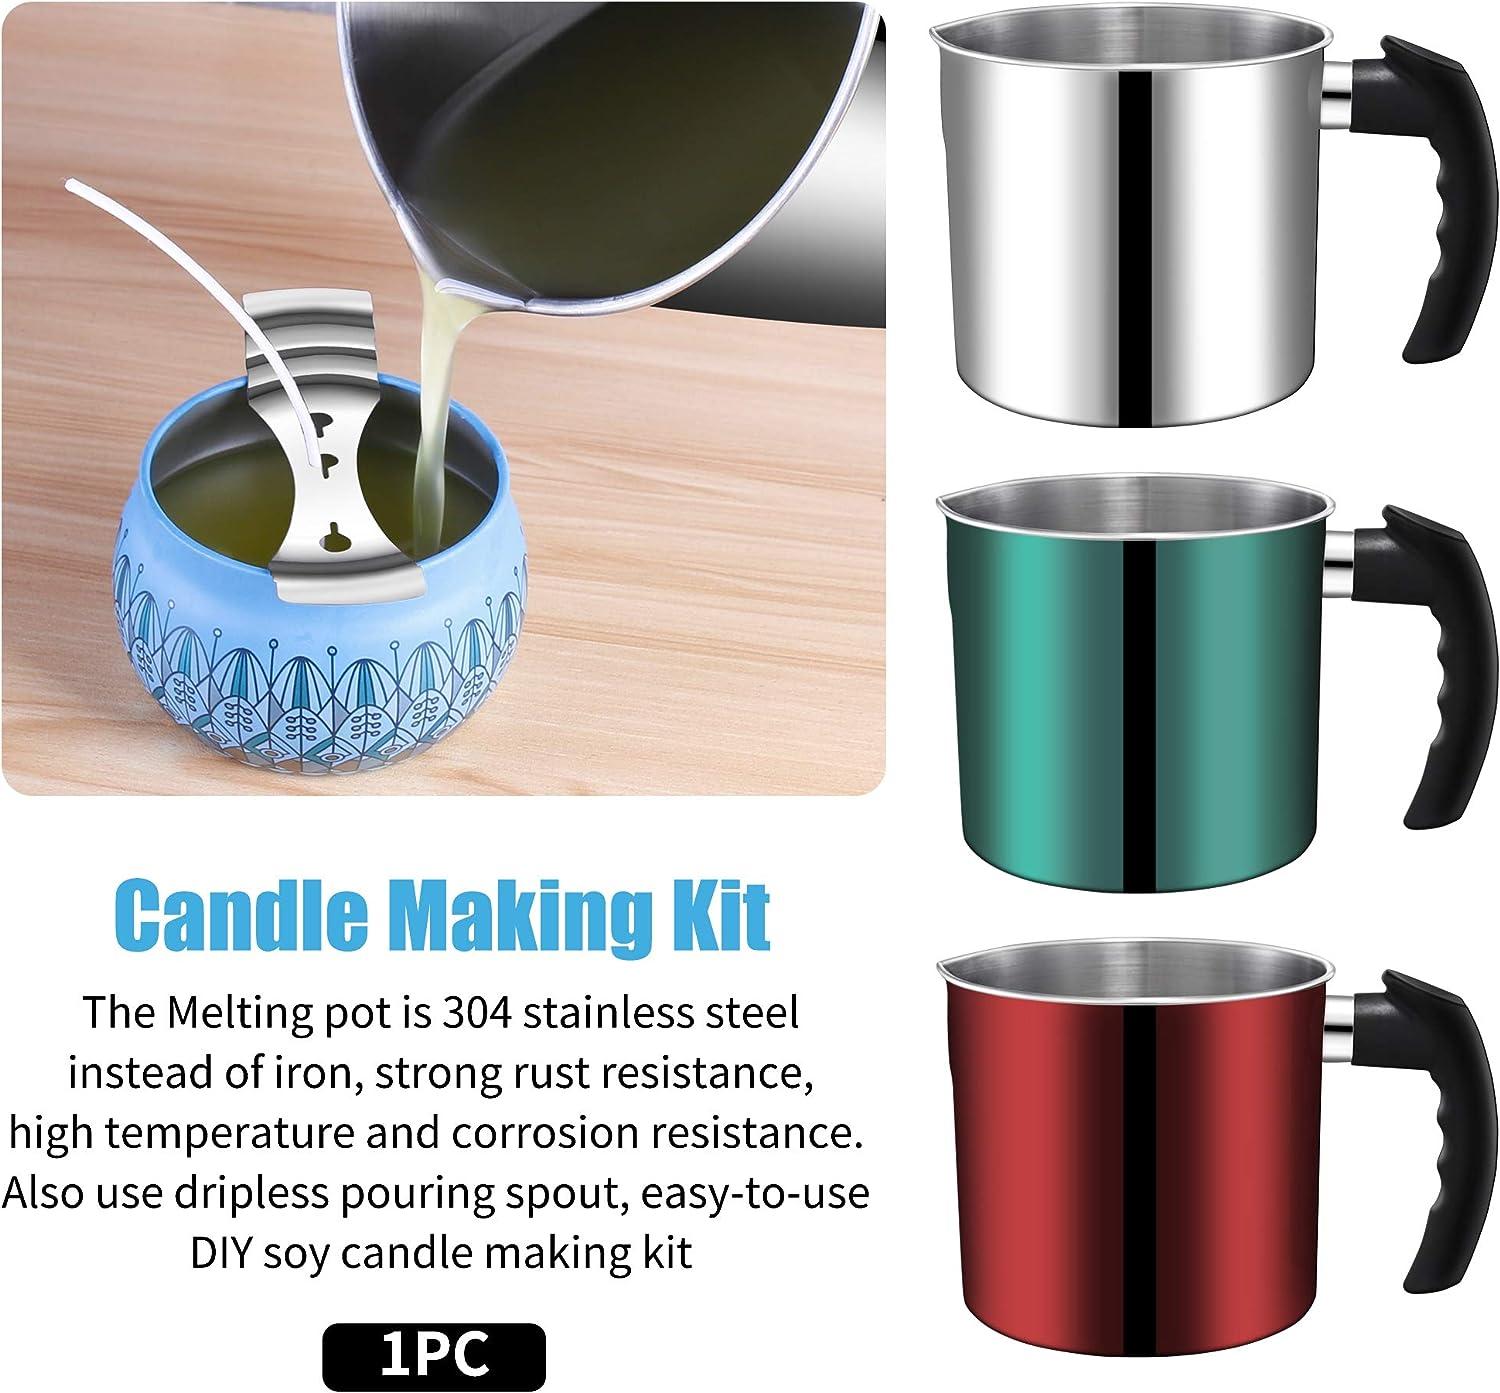 Candle Making Pouring Pot, DINGPAI 44oz Double Boiler Wax Melting Pot, 1pc  Spoon, 304 Stainless Steel Candle Making Pitcher, Silver Color with  Heat-Resistant Handle and Dripless Pouring Spout Design